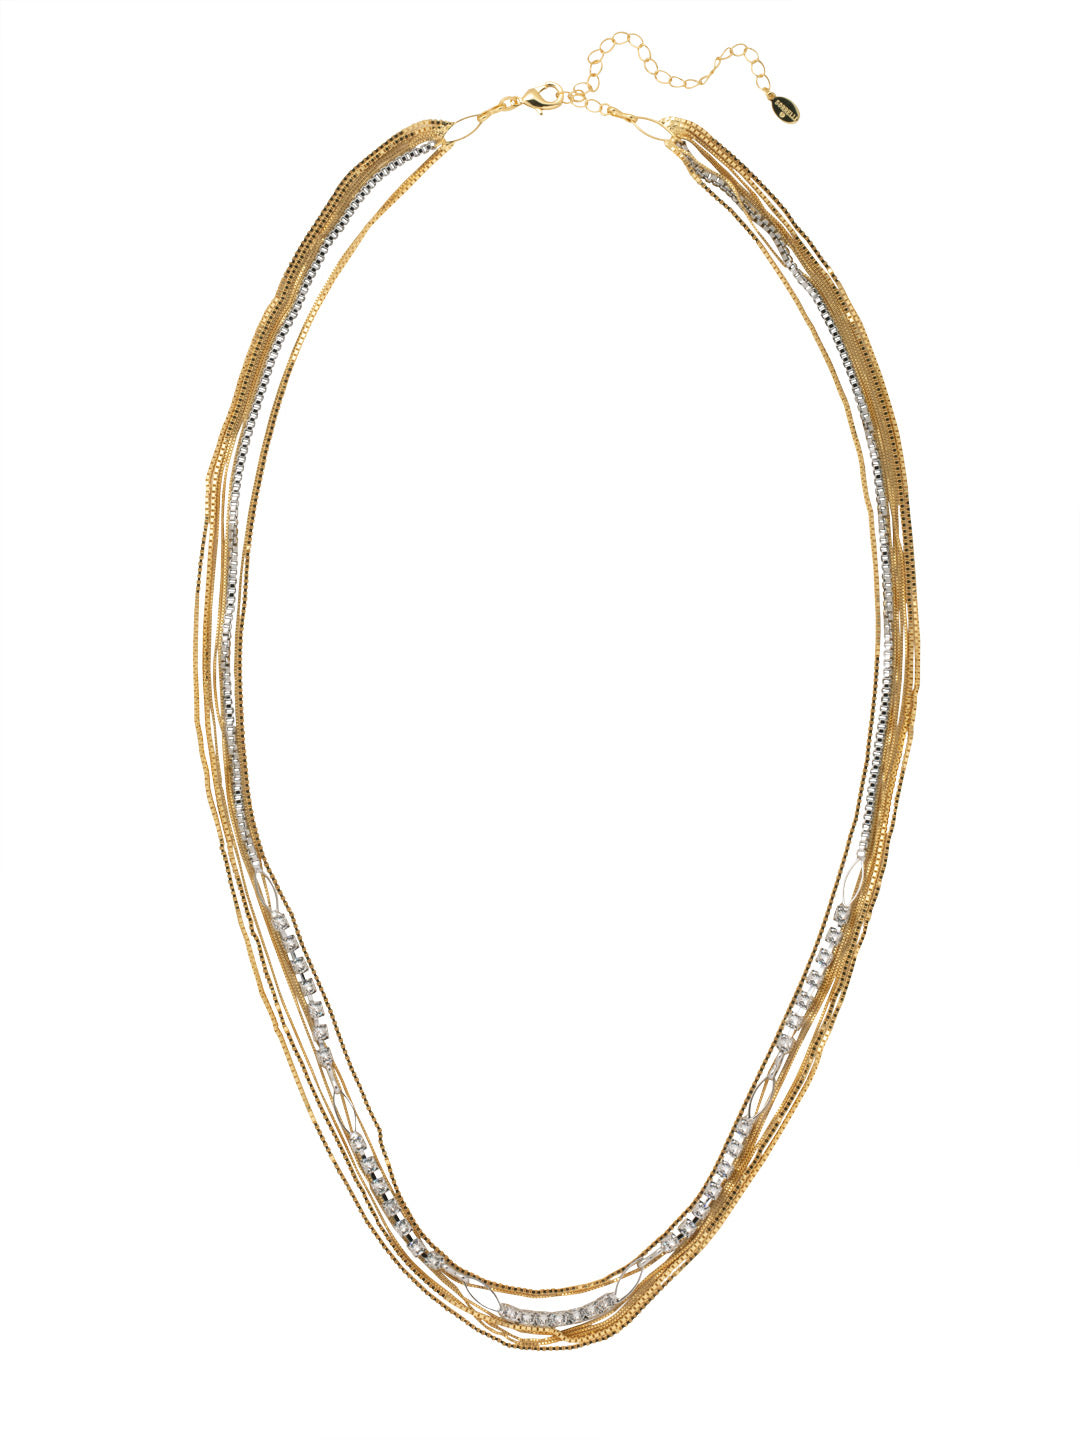 Lottie Long Necklace - 4NFC9MXMTL - Make a statement with The Lottie Long Necklace. An assortment of chain styles. From Sorrelli's Bare Metallic collection in our Mixed Metal finish.